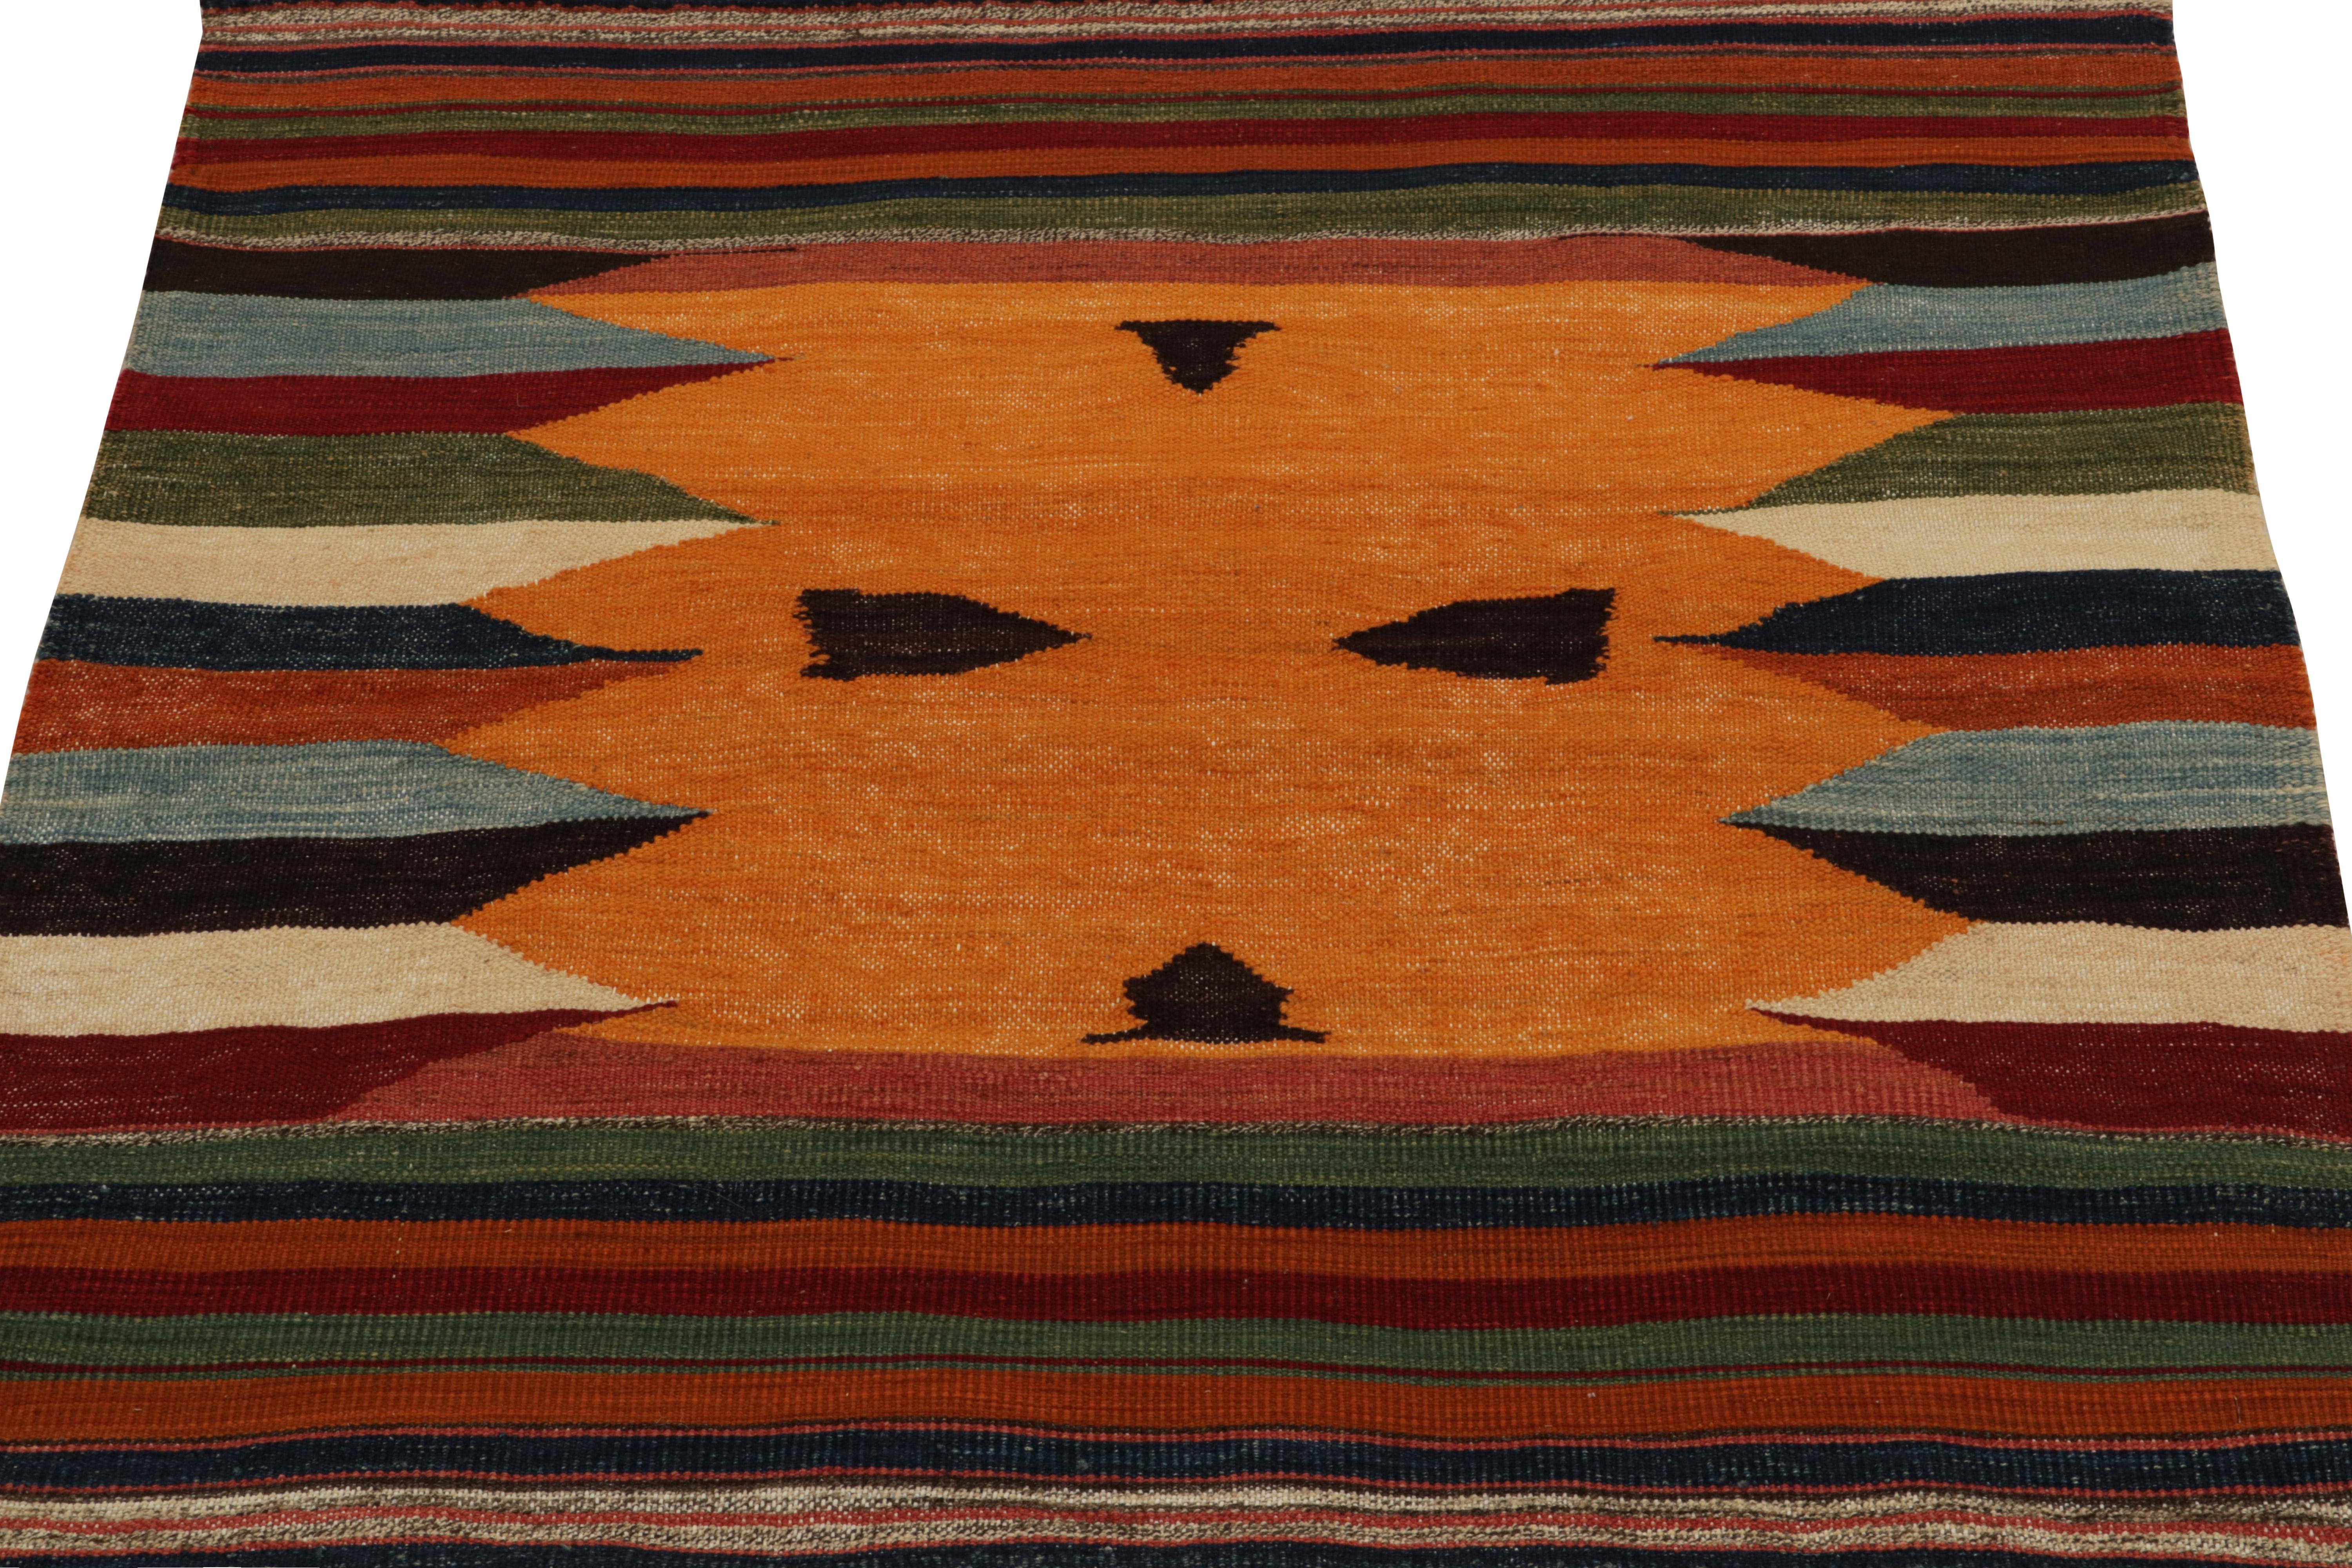 Originating circa 1980-1990, a rare vintage curation of small-sized Persian Sofreh Kilims our principal has newly acquired. Distinguished for both its 3x3 square size and durability among flat weaves of the period. 

The piece carries a unique